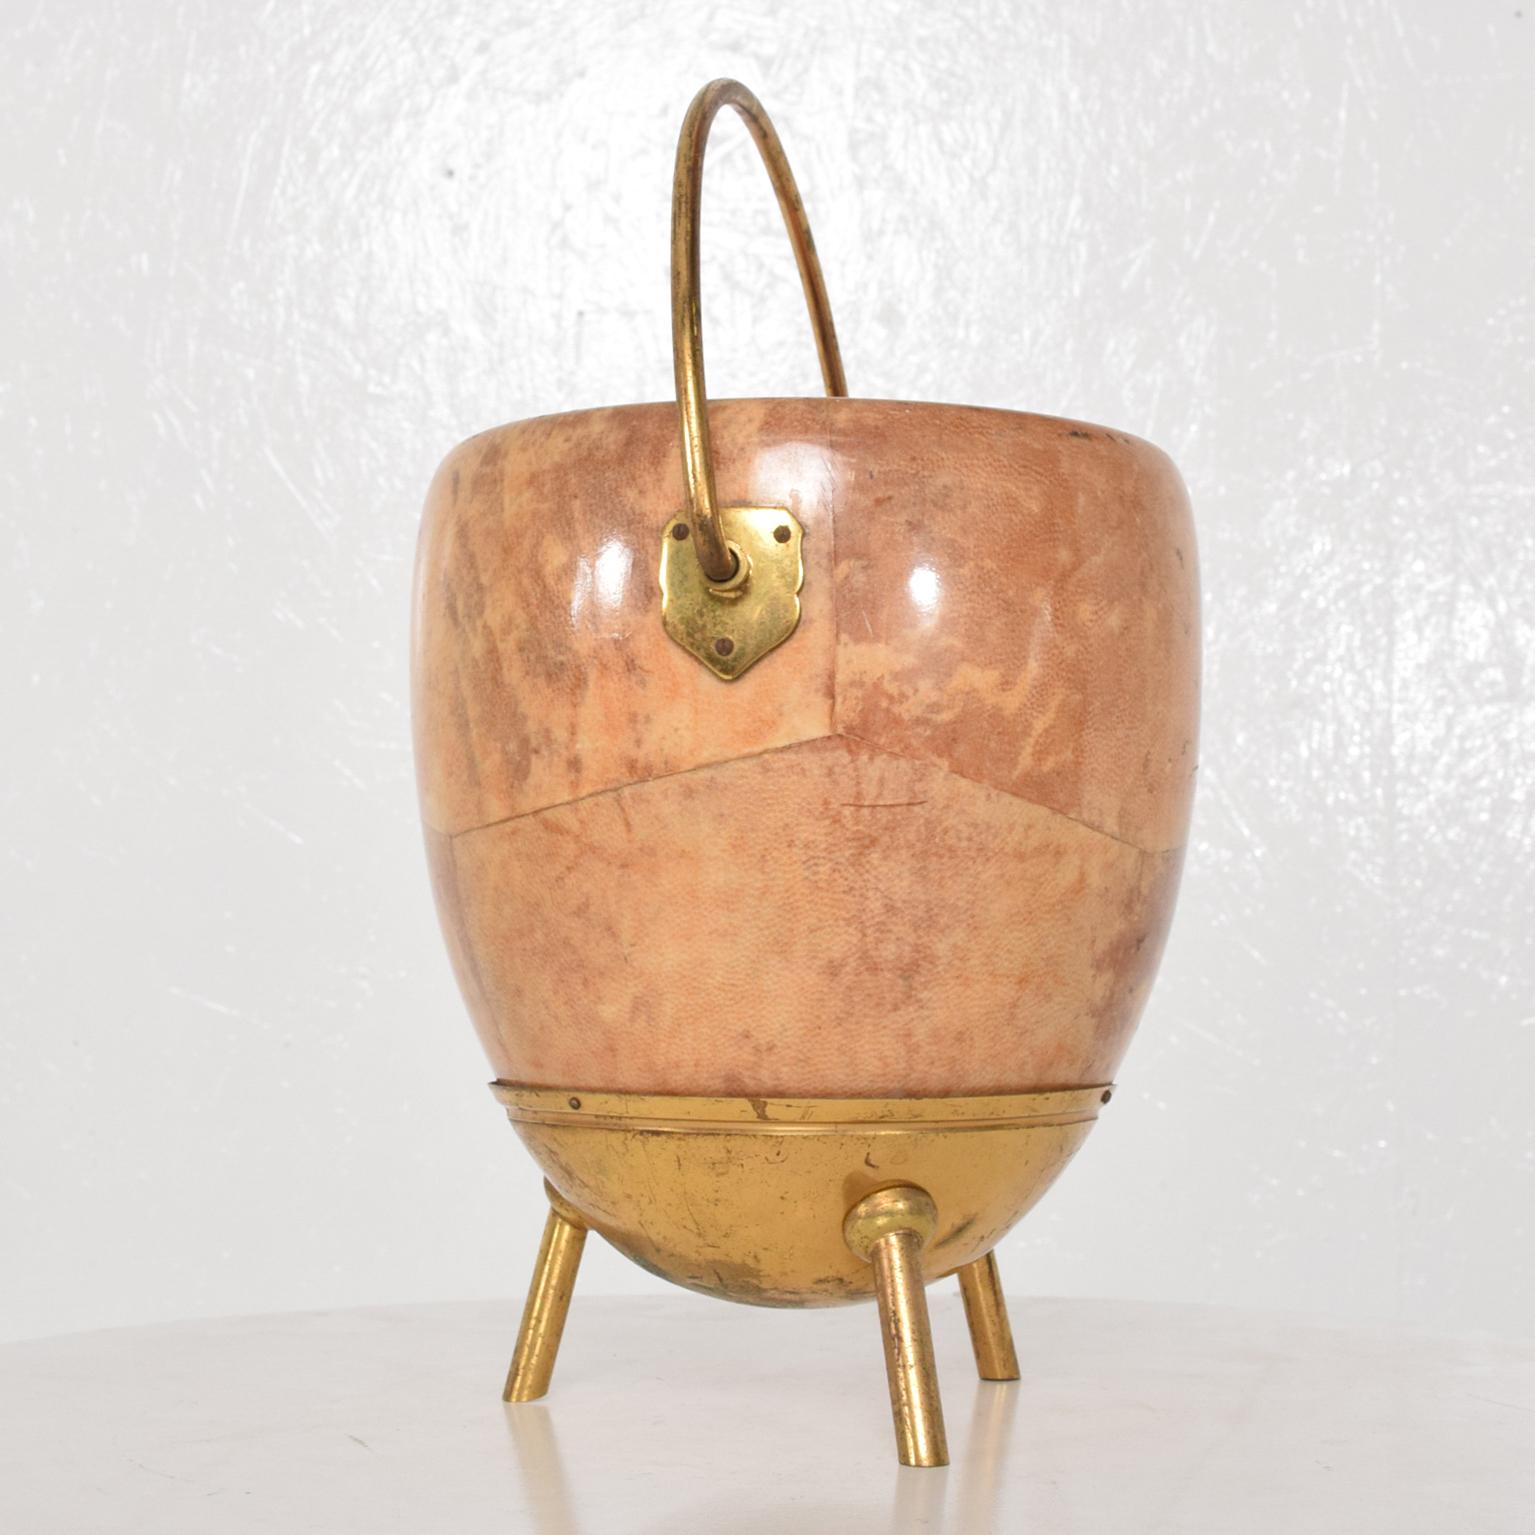 For your consideration: Goatskin Brass Champagne Pedestal Bar Bucket attributed to Aldo Tura (unmarked). Italy, circa 1960s.

Dimensions: 12